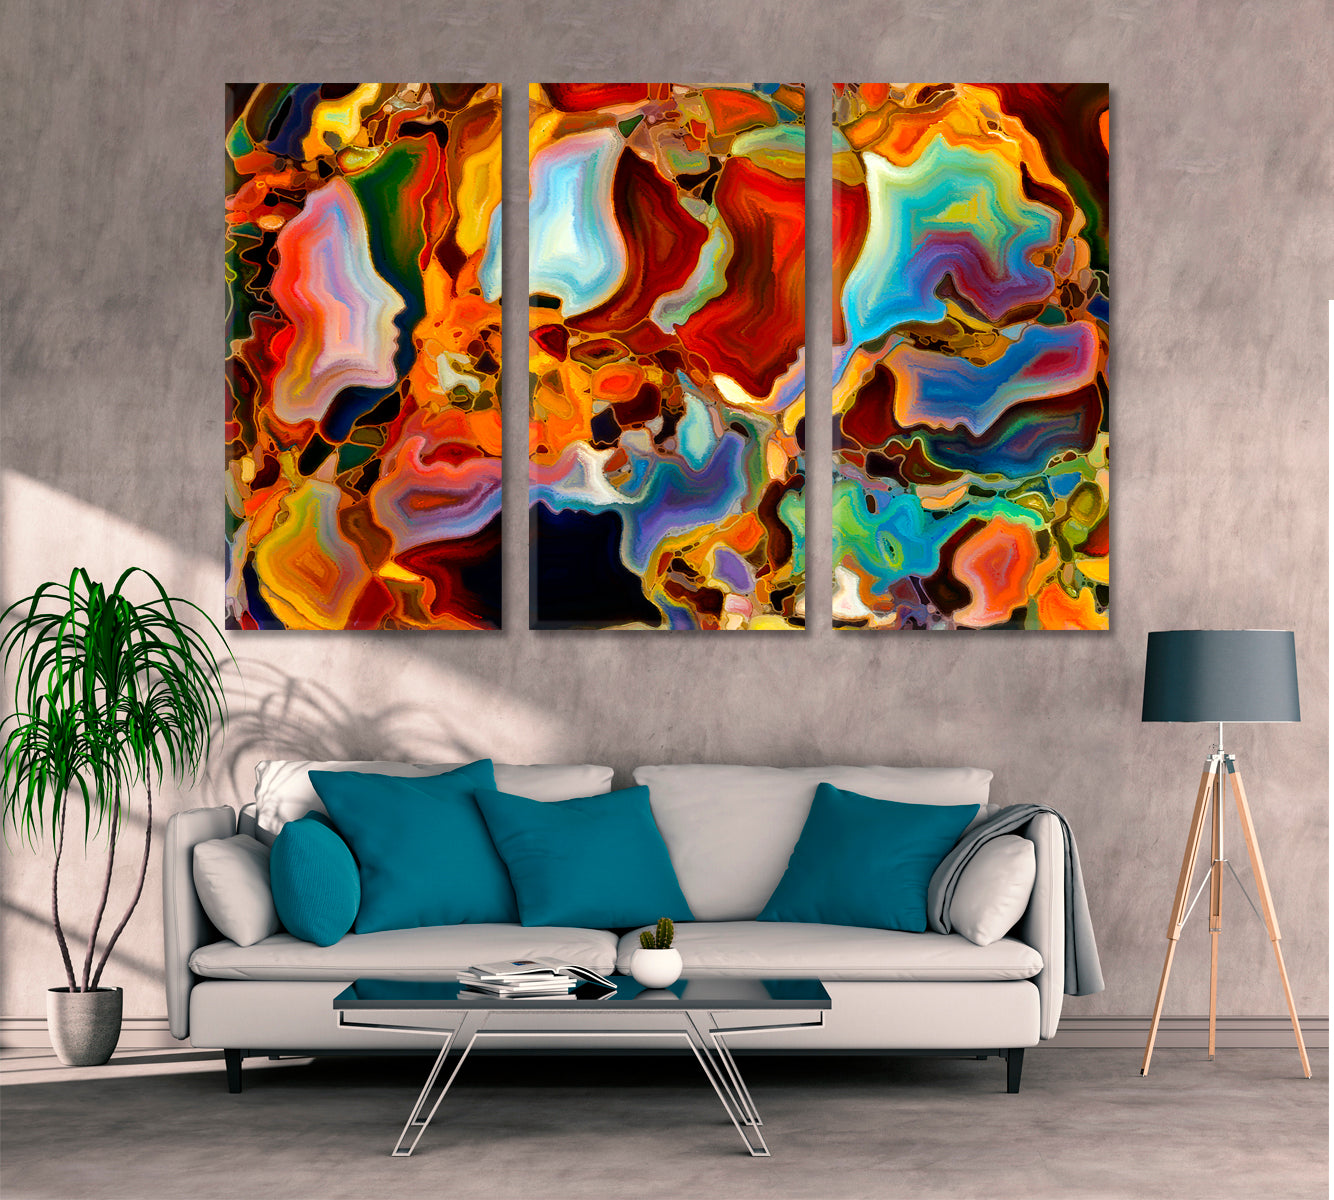 People And Colors Abstract Art Print Artesty 3 panels 36" x 24" 